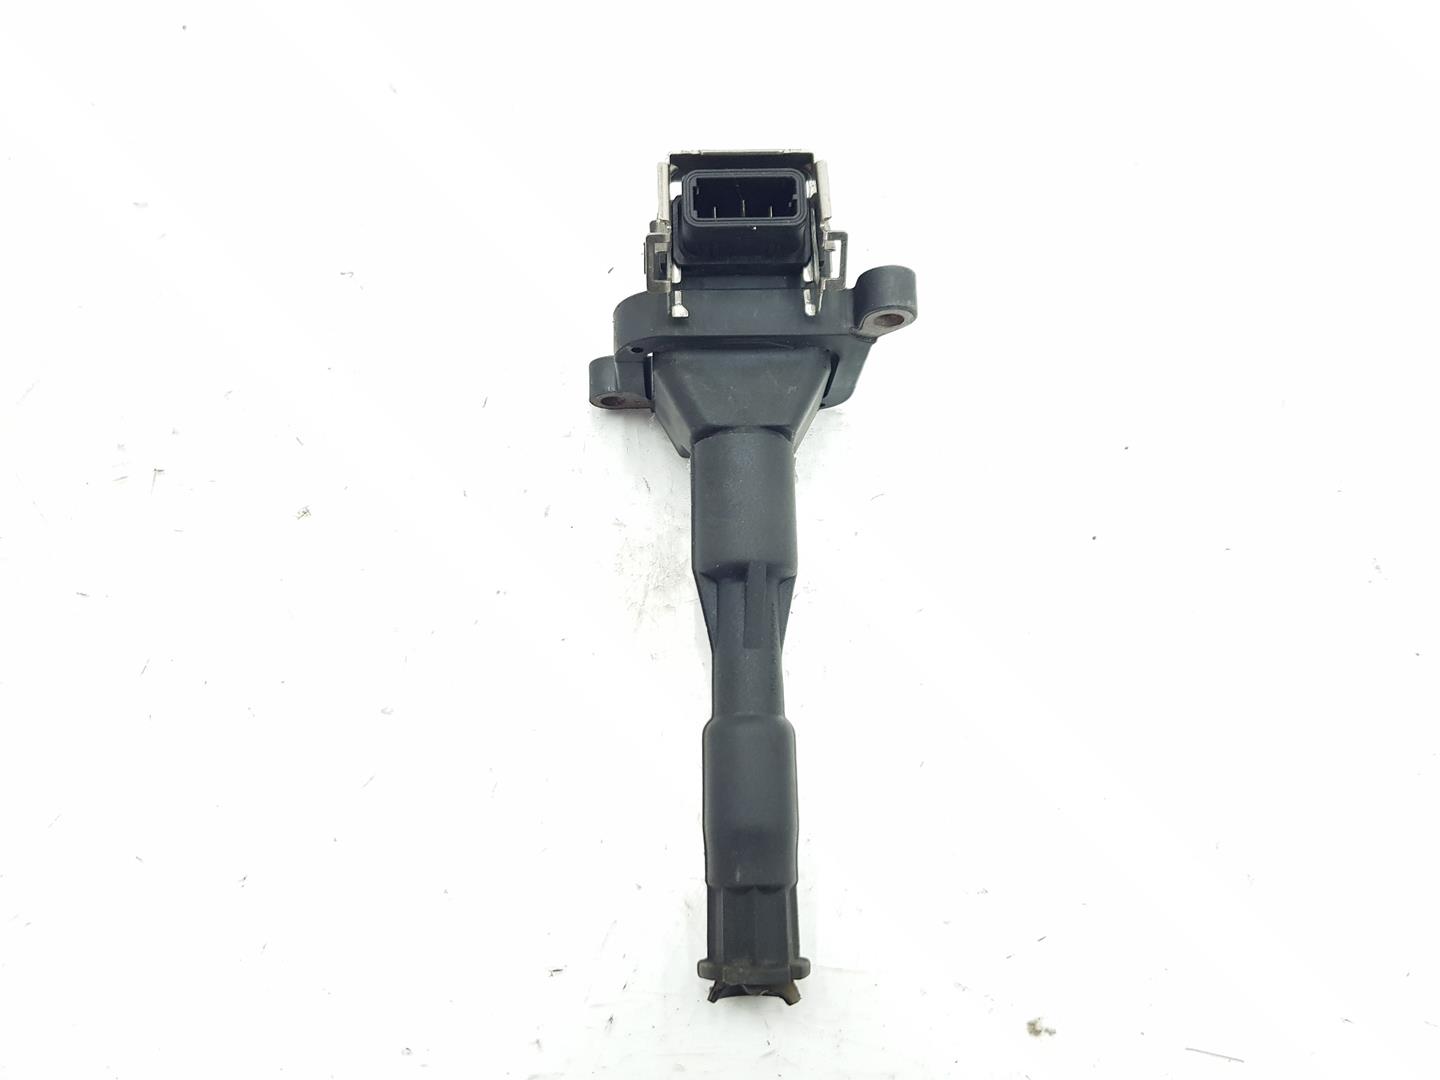 BMW 5 Series E39 (1995-2004) High Voltage Ignition Coil 12131740477, 1703227, 0221504004 19812249